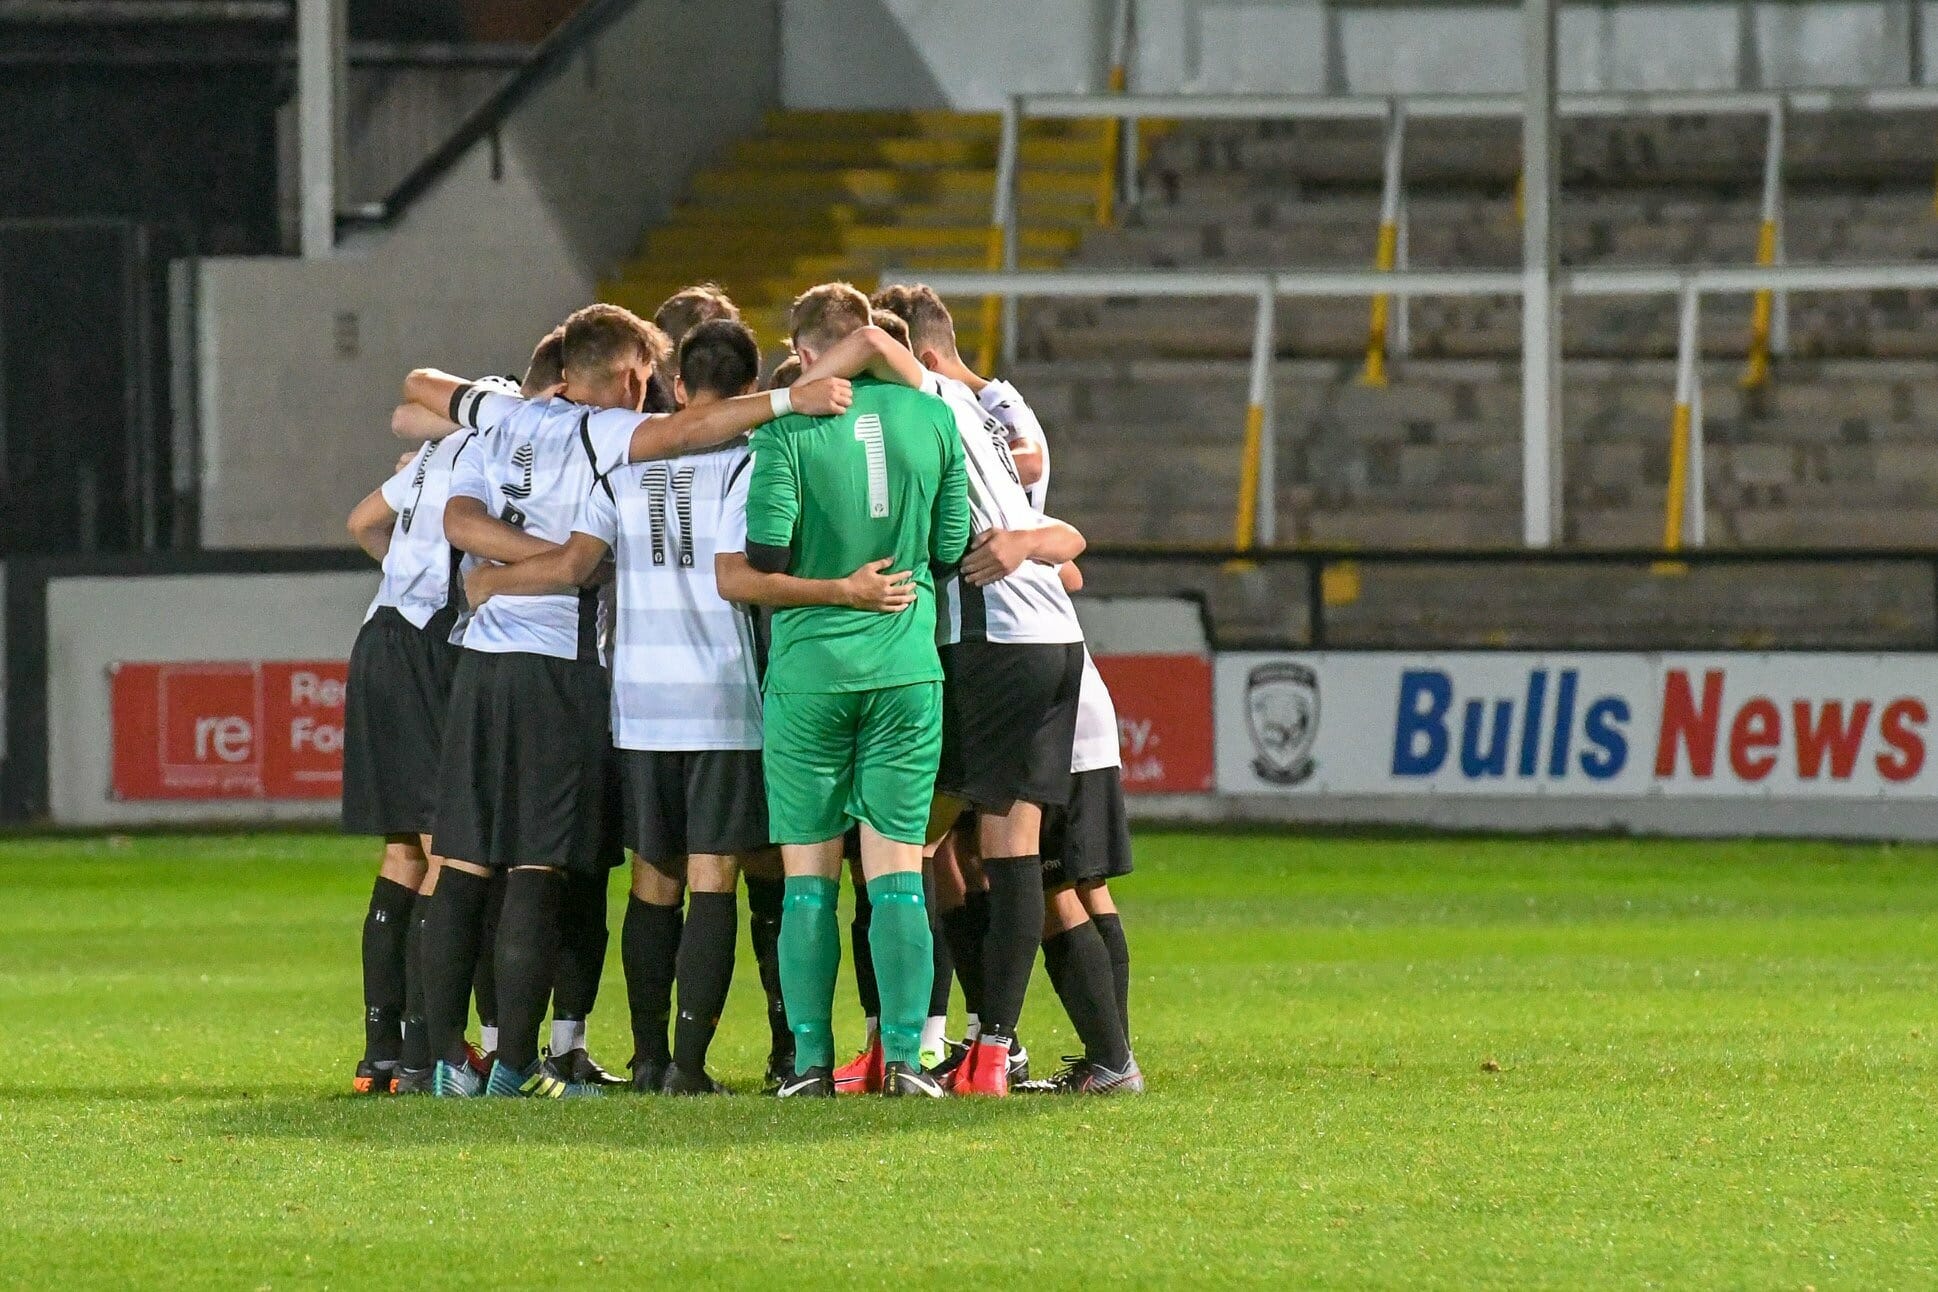 Bulls U18’s back in Youth Cup action tonight